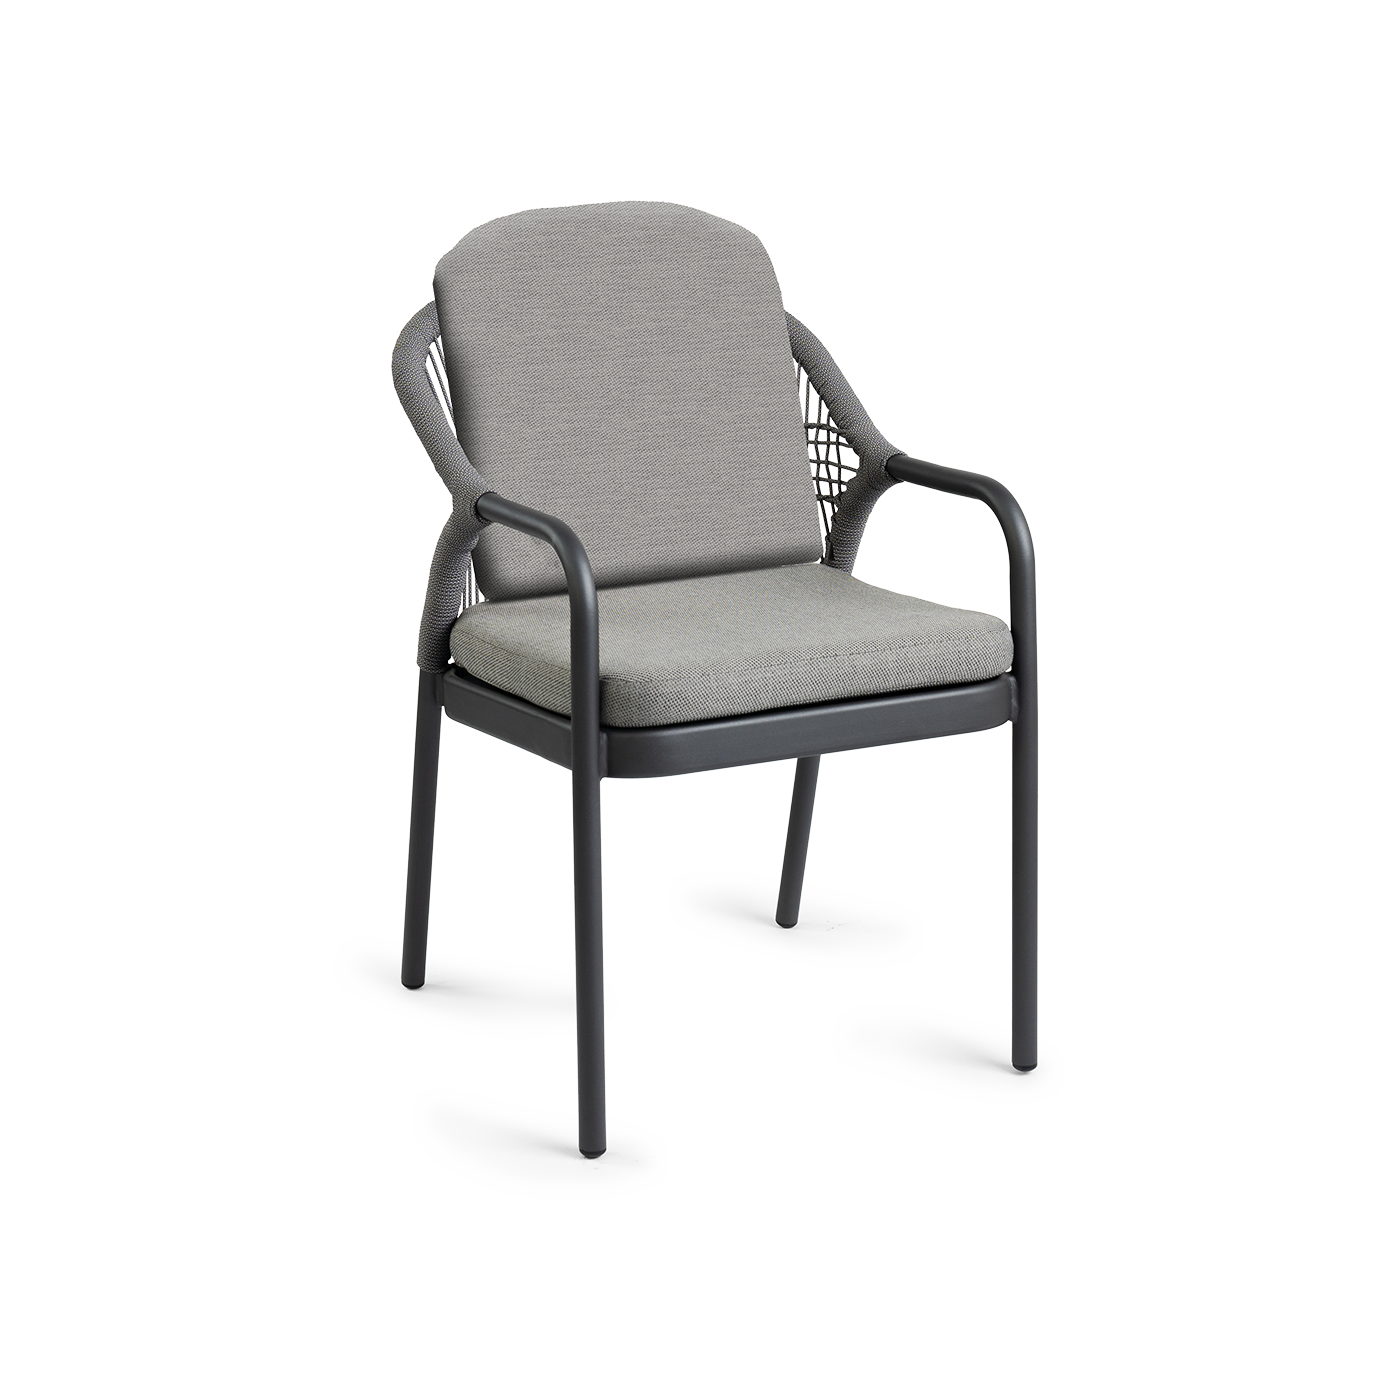 Fiona Dining Chair Charcoal